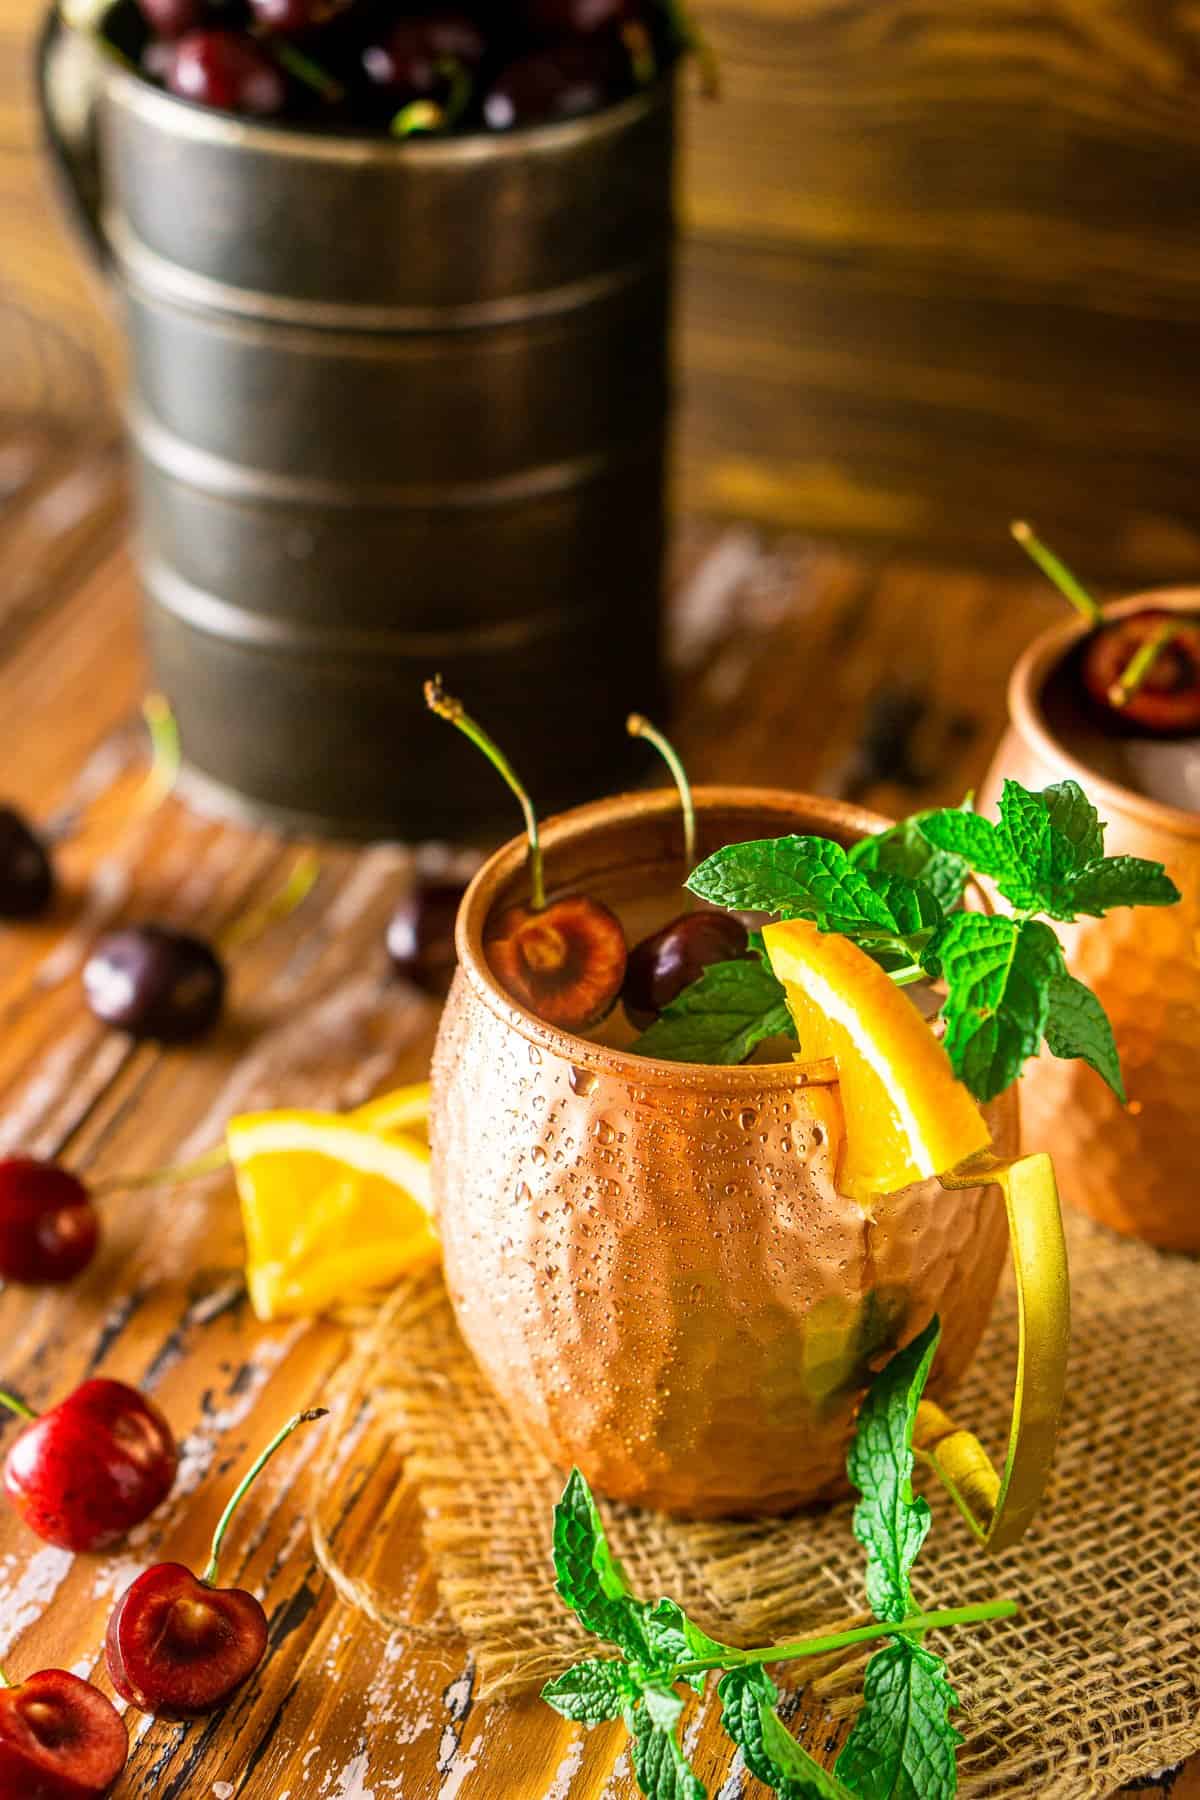 A cherry-orange Kentucky mule with a sprig of mint on burlap.